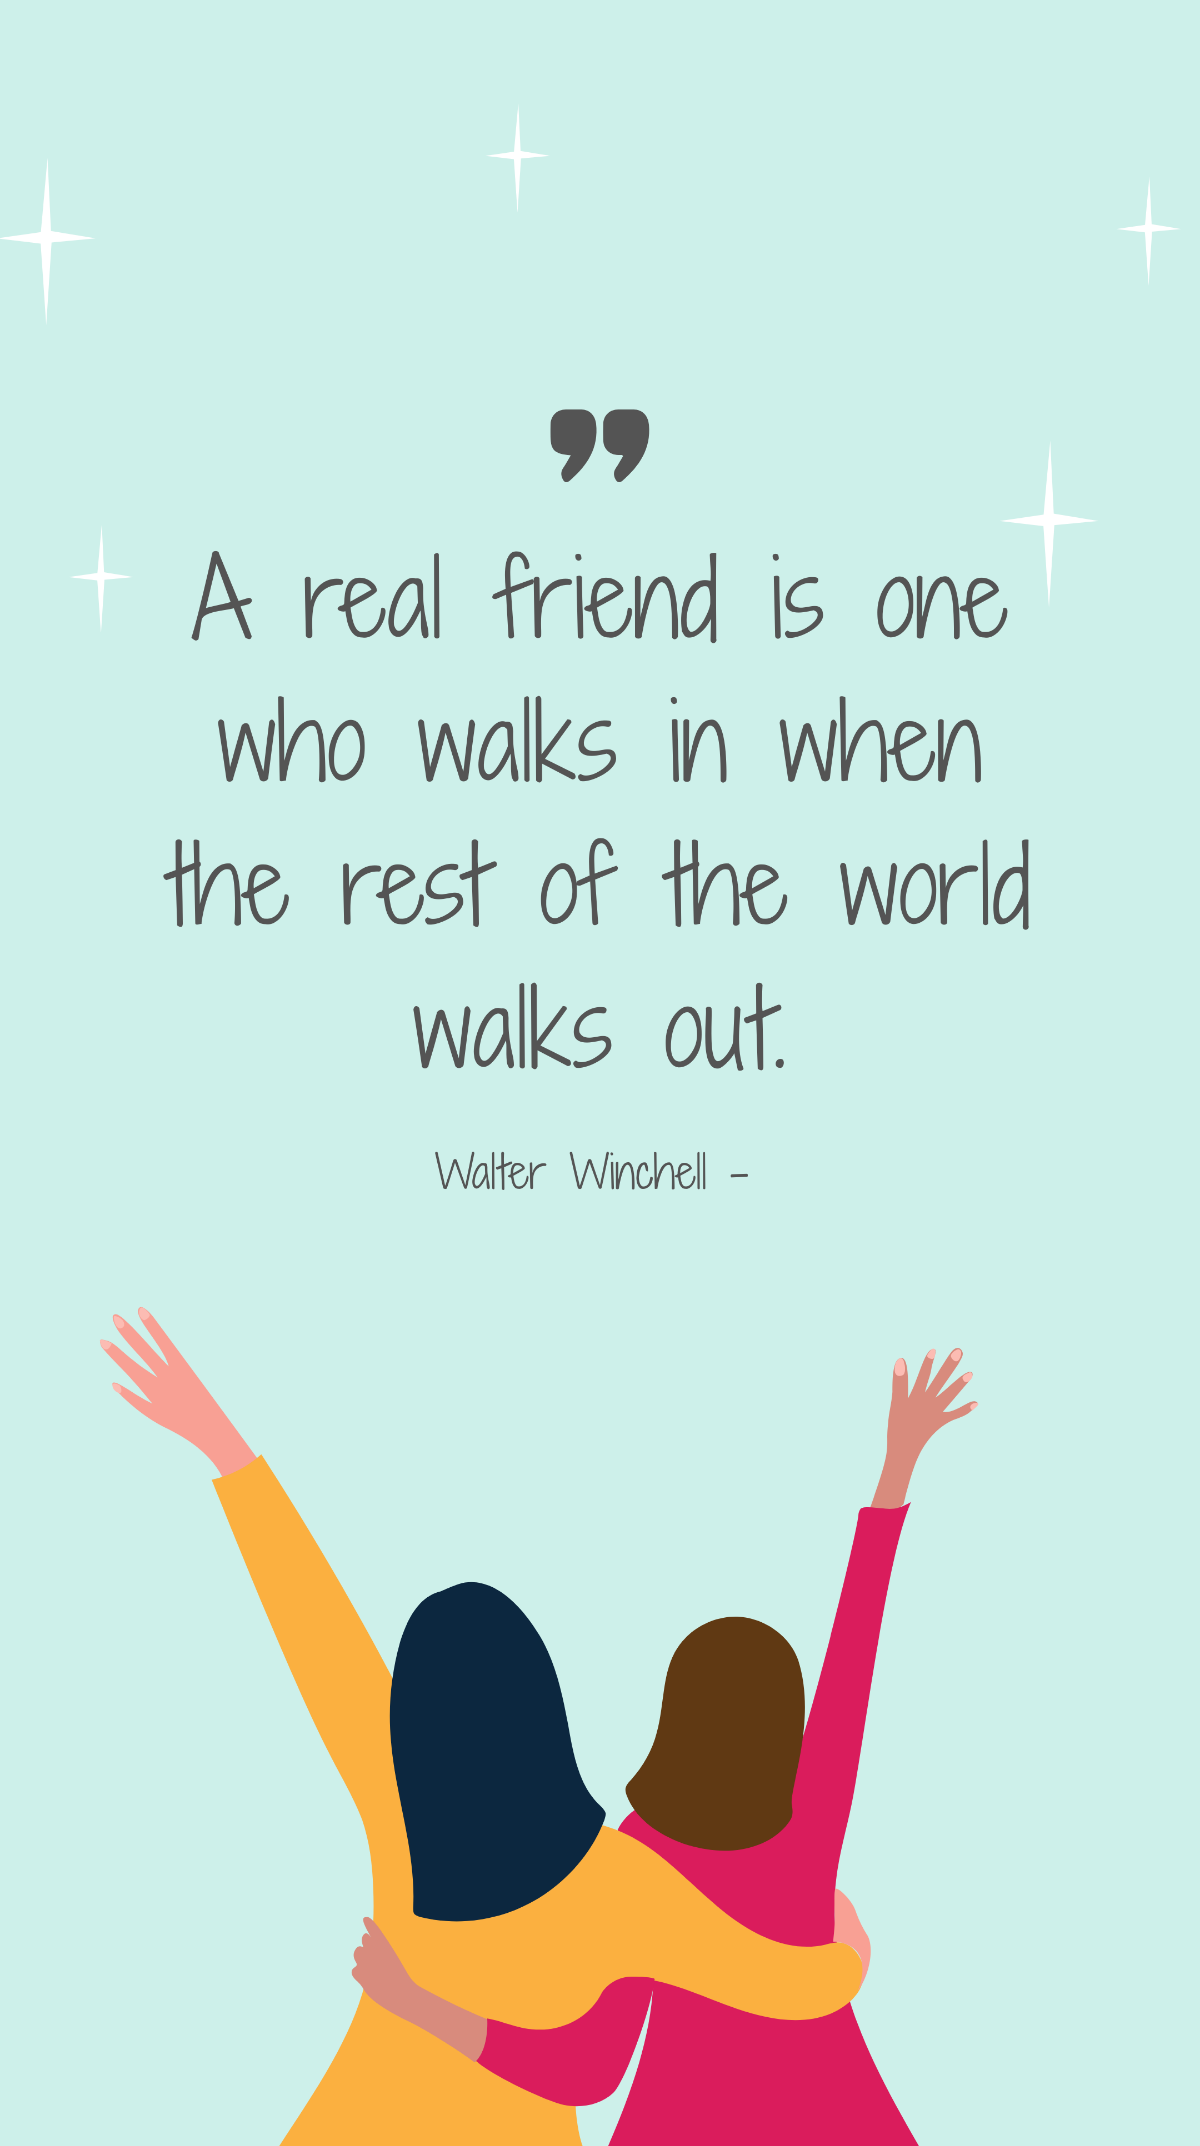 Walter Winchell - A real friend is one who walks in when the rest of the world walks out. Template